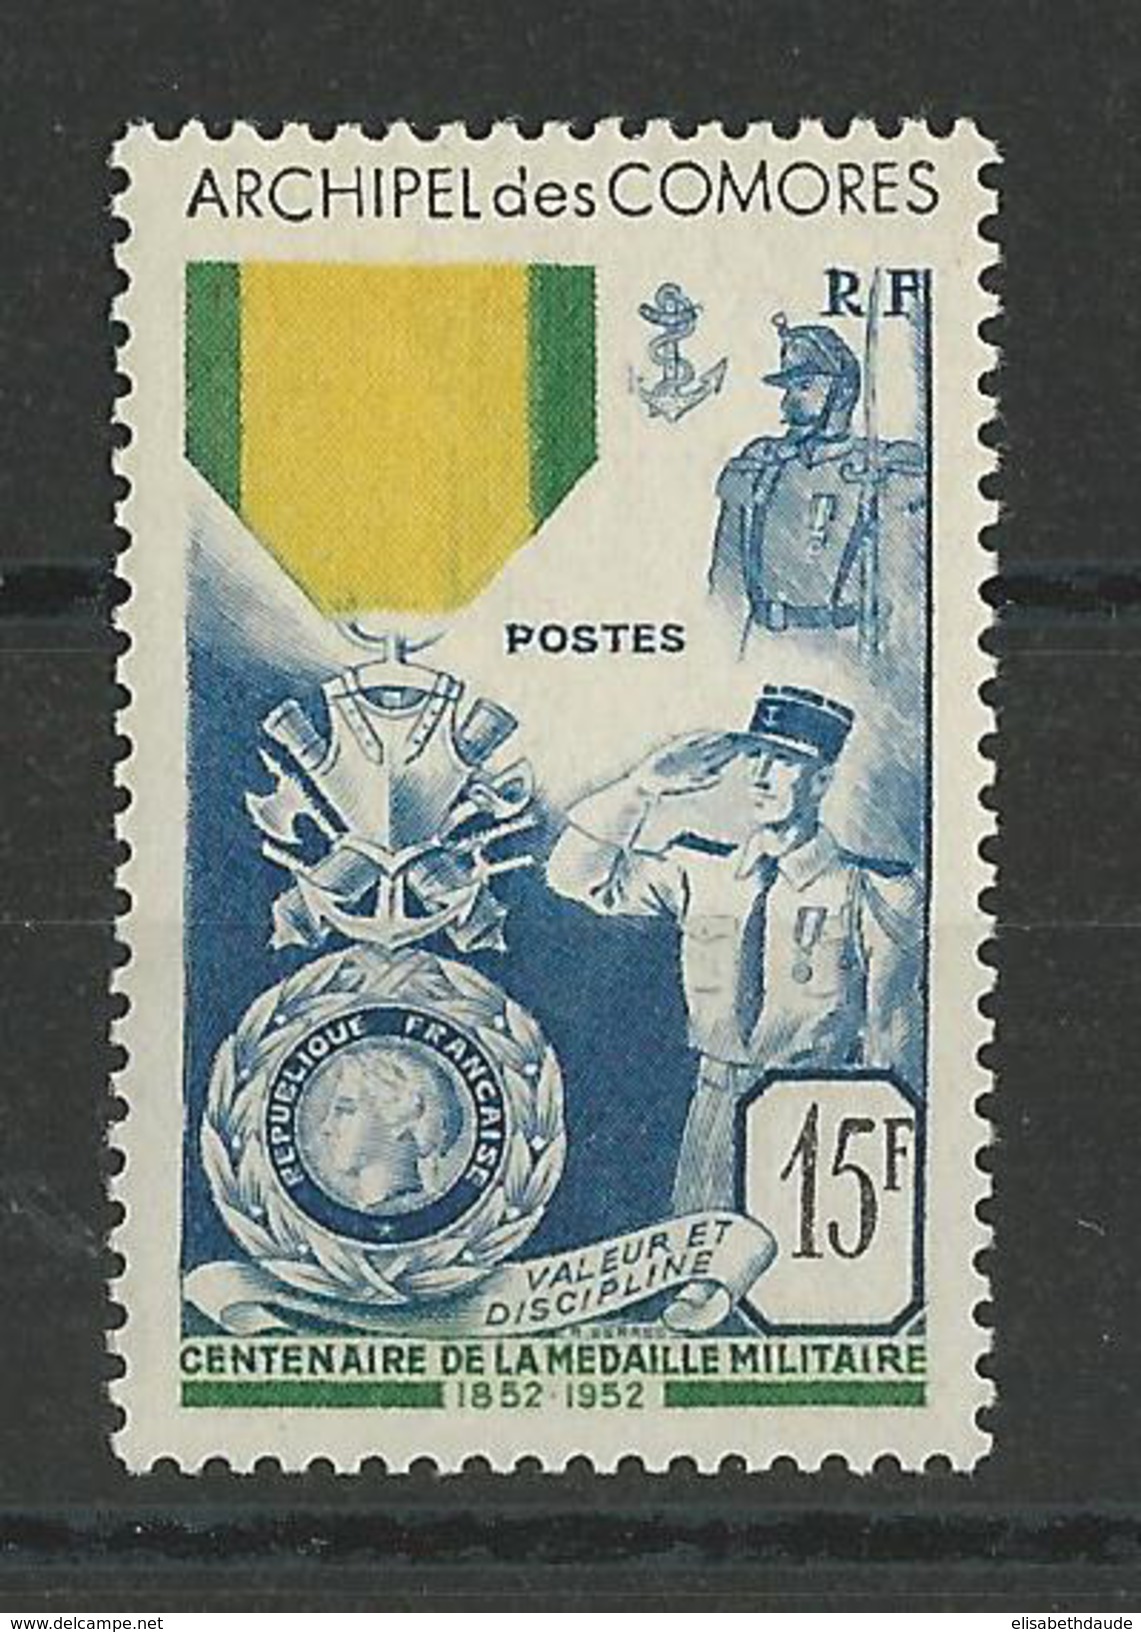 COMORES - 1952 - YVERT N°12 ** MNH - COTE = 66 EUR. - MEDAILLE MILITAIRE - Unused Stamps